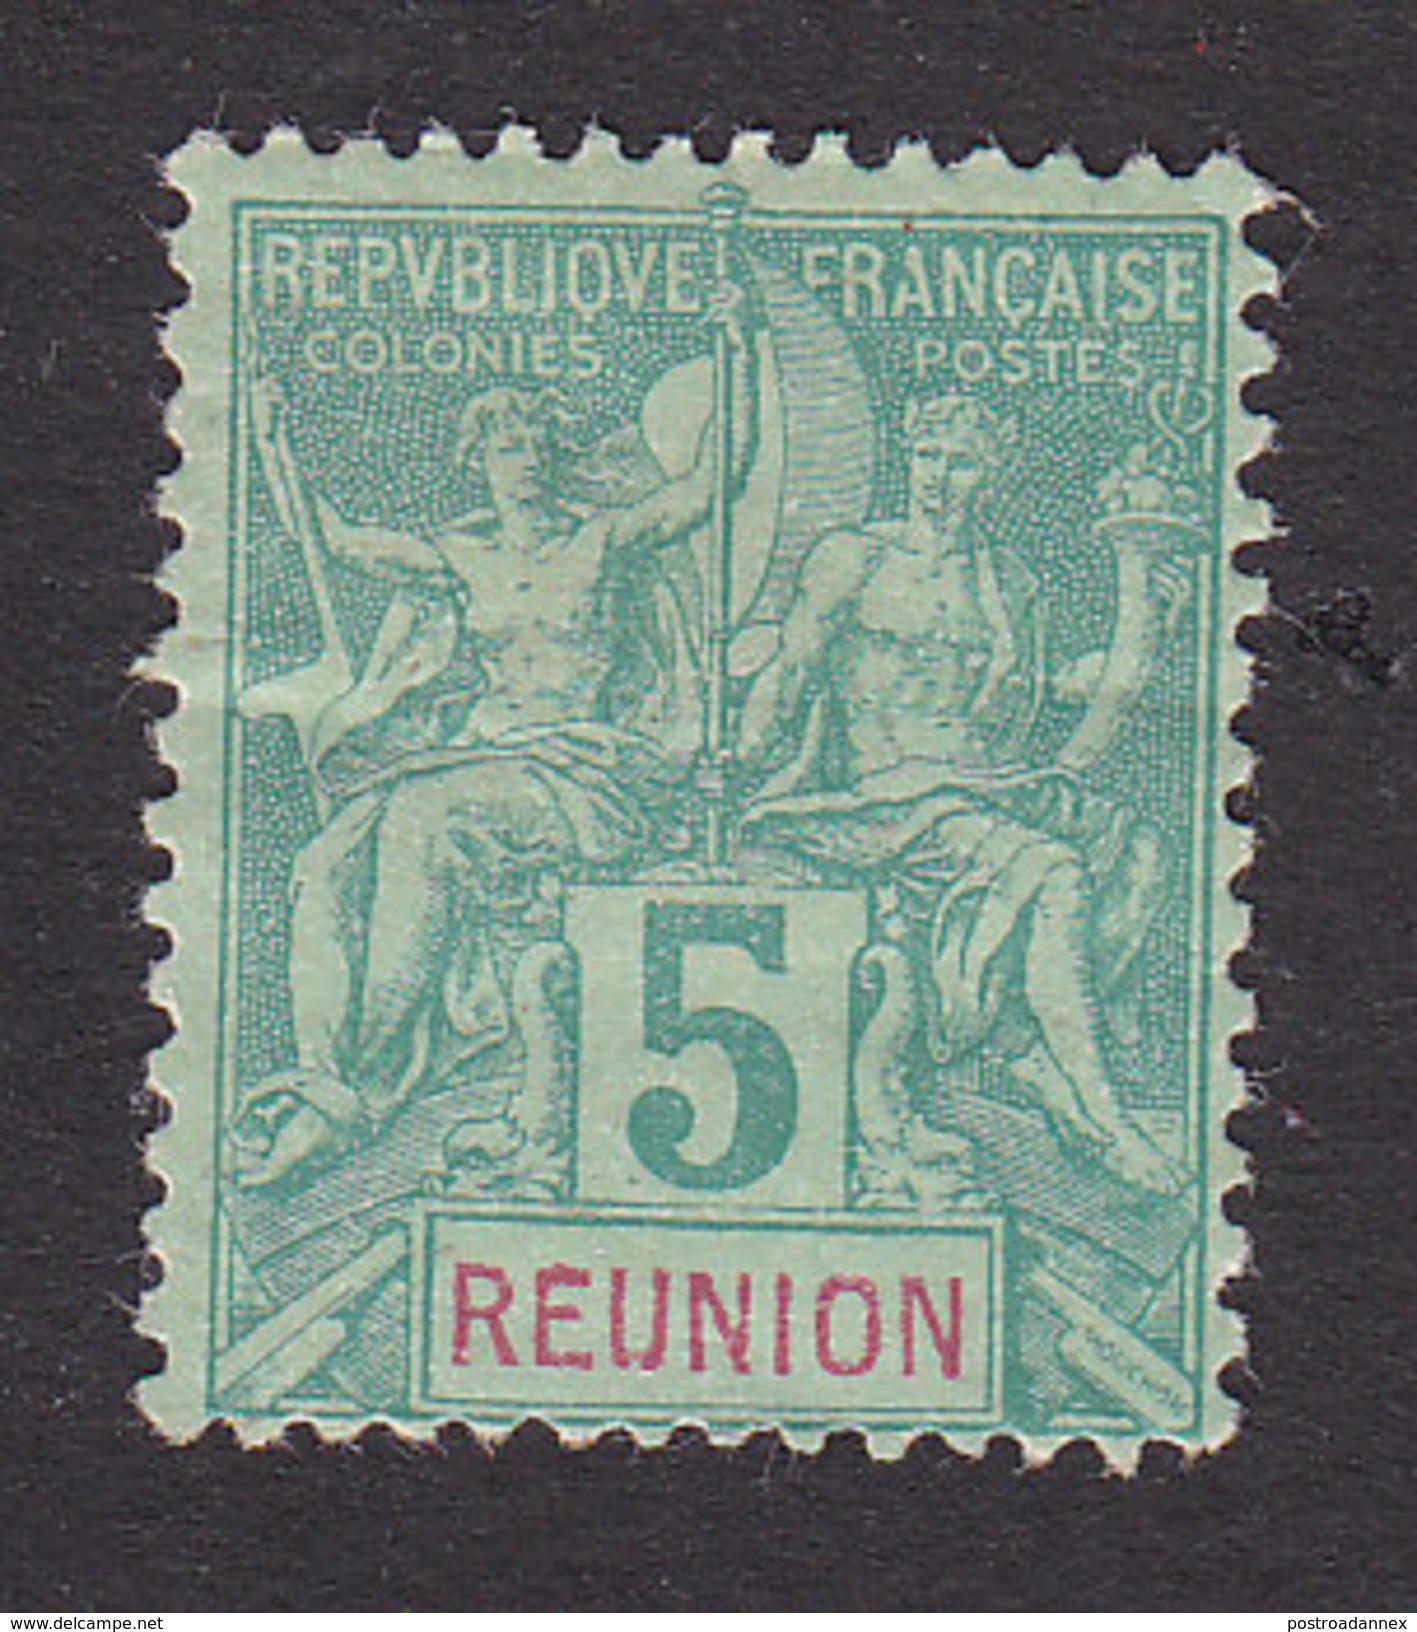 Reunion, Scott #37, Mint Hinged, Navigation And Commerce, Issued 1892 - Unused Stamps